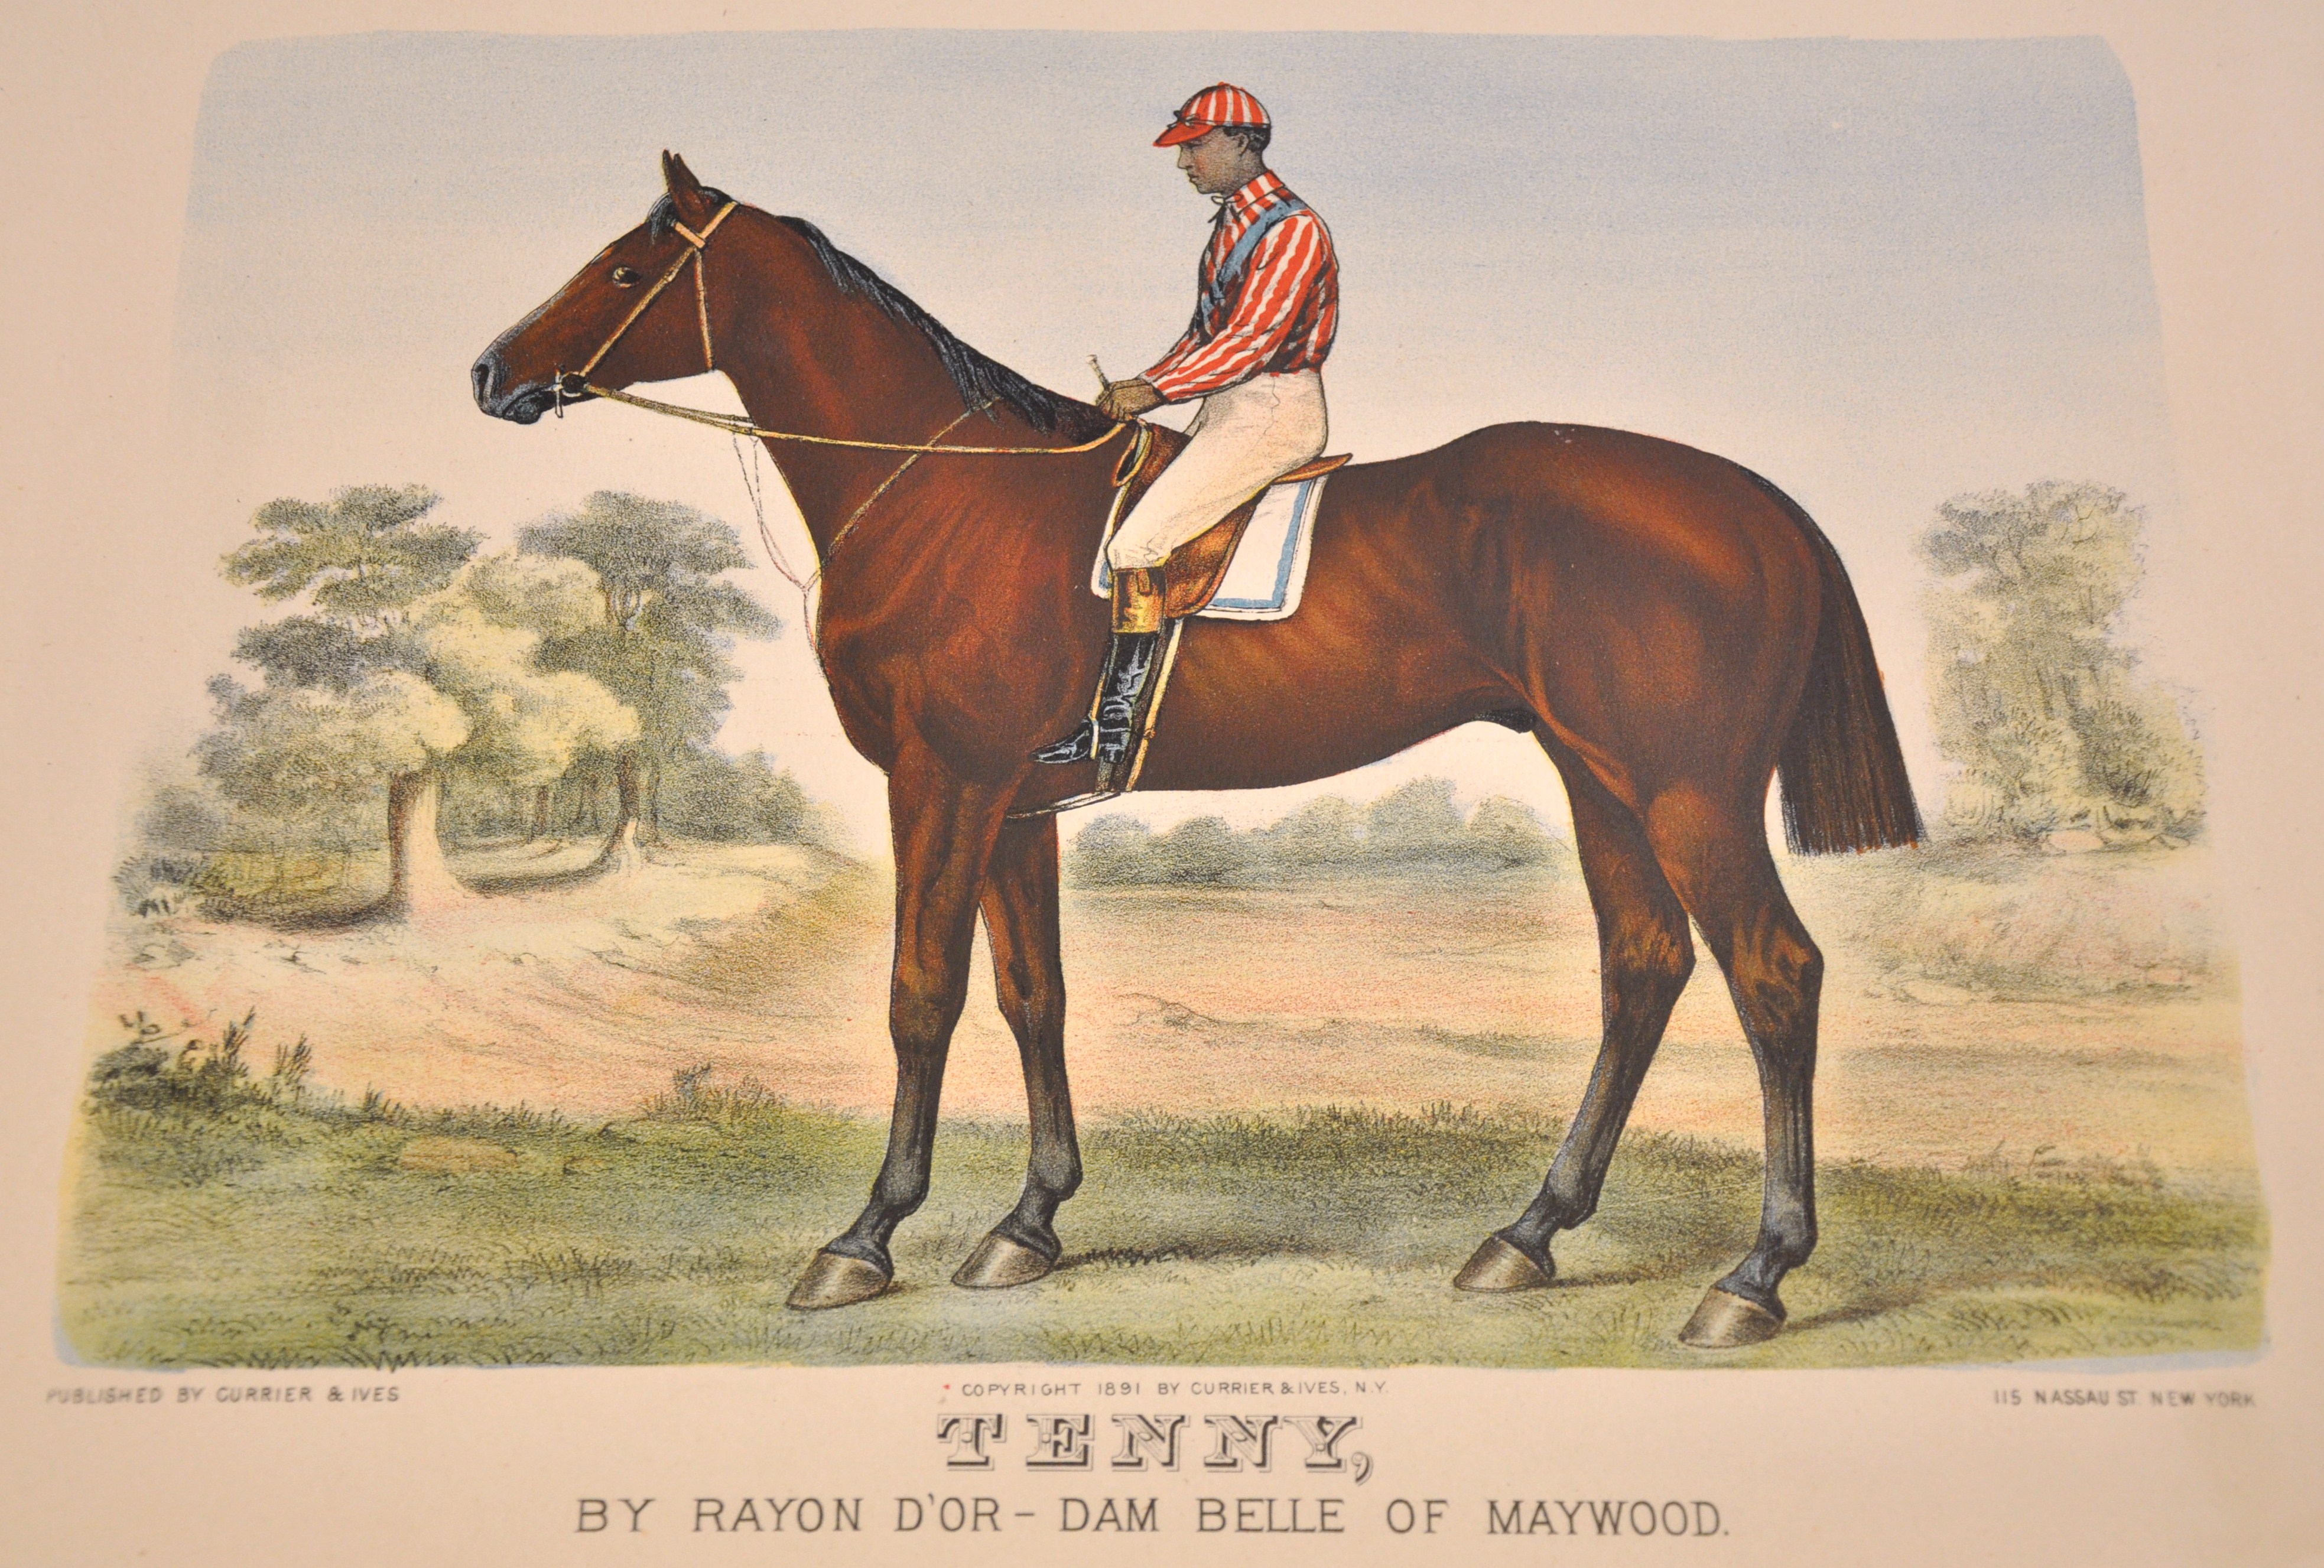 Currier & Ives print of Tenny with jockey (believed to be Shelby Barnes) (Museum Collection)